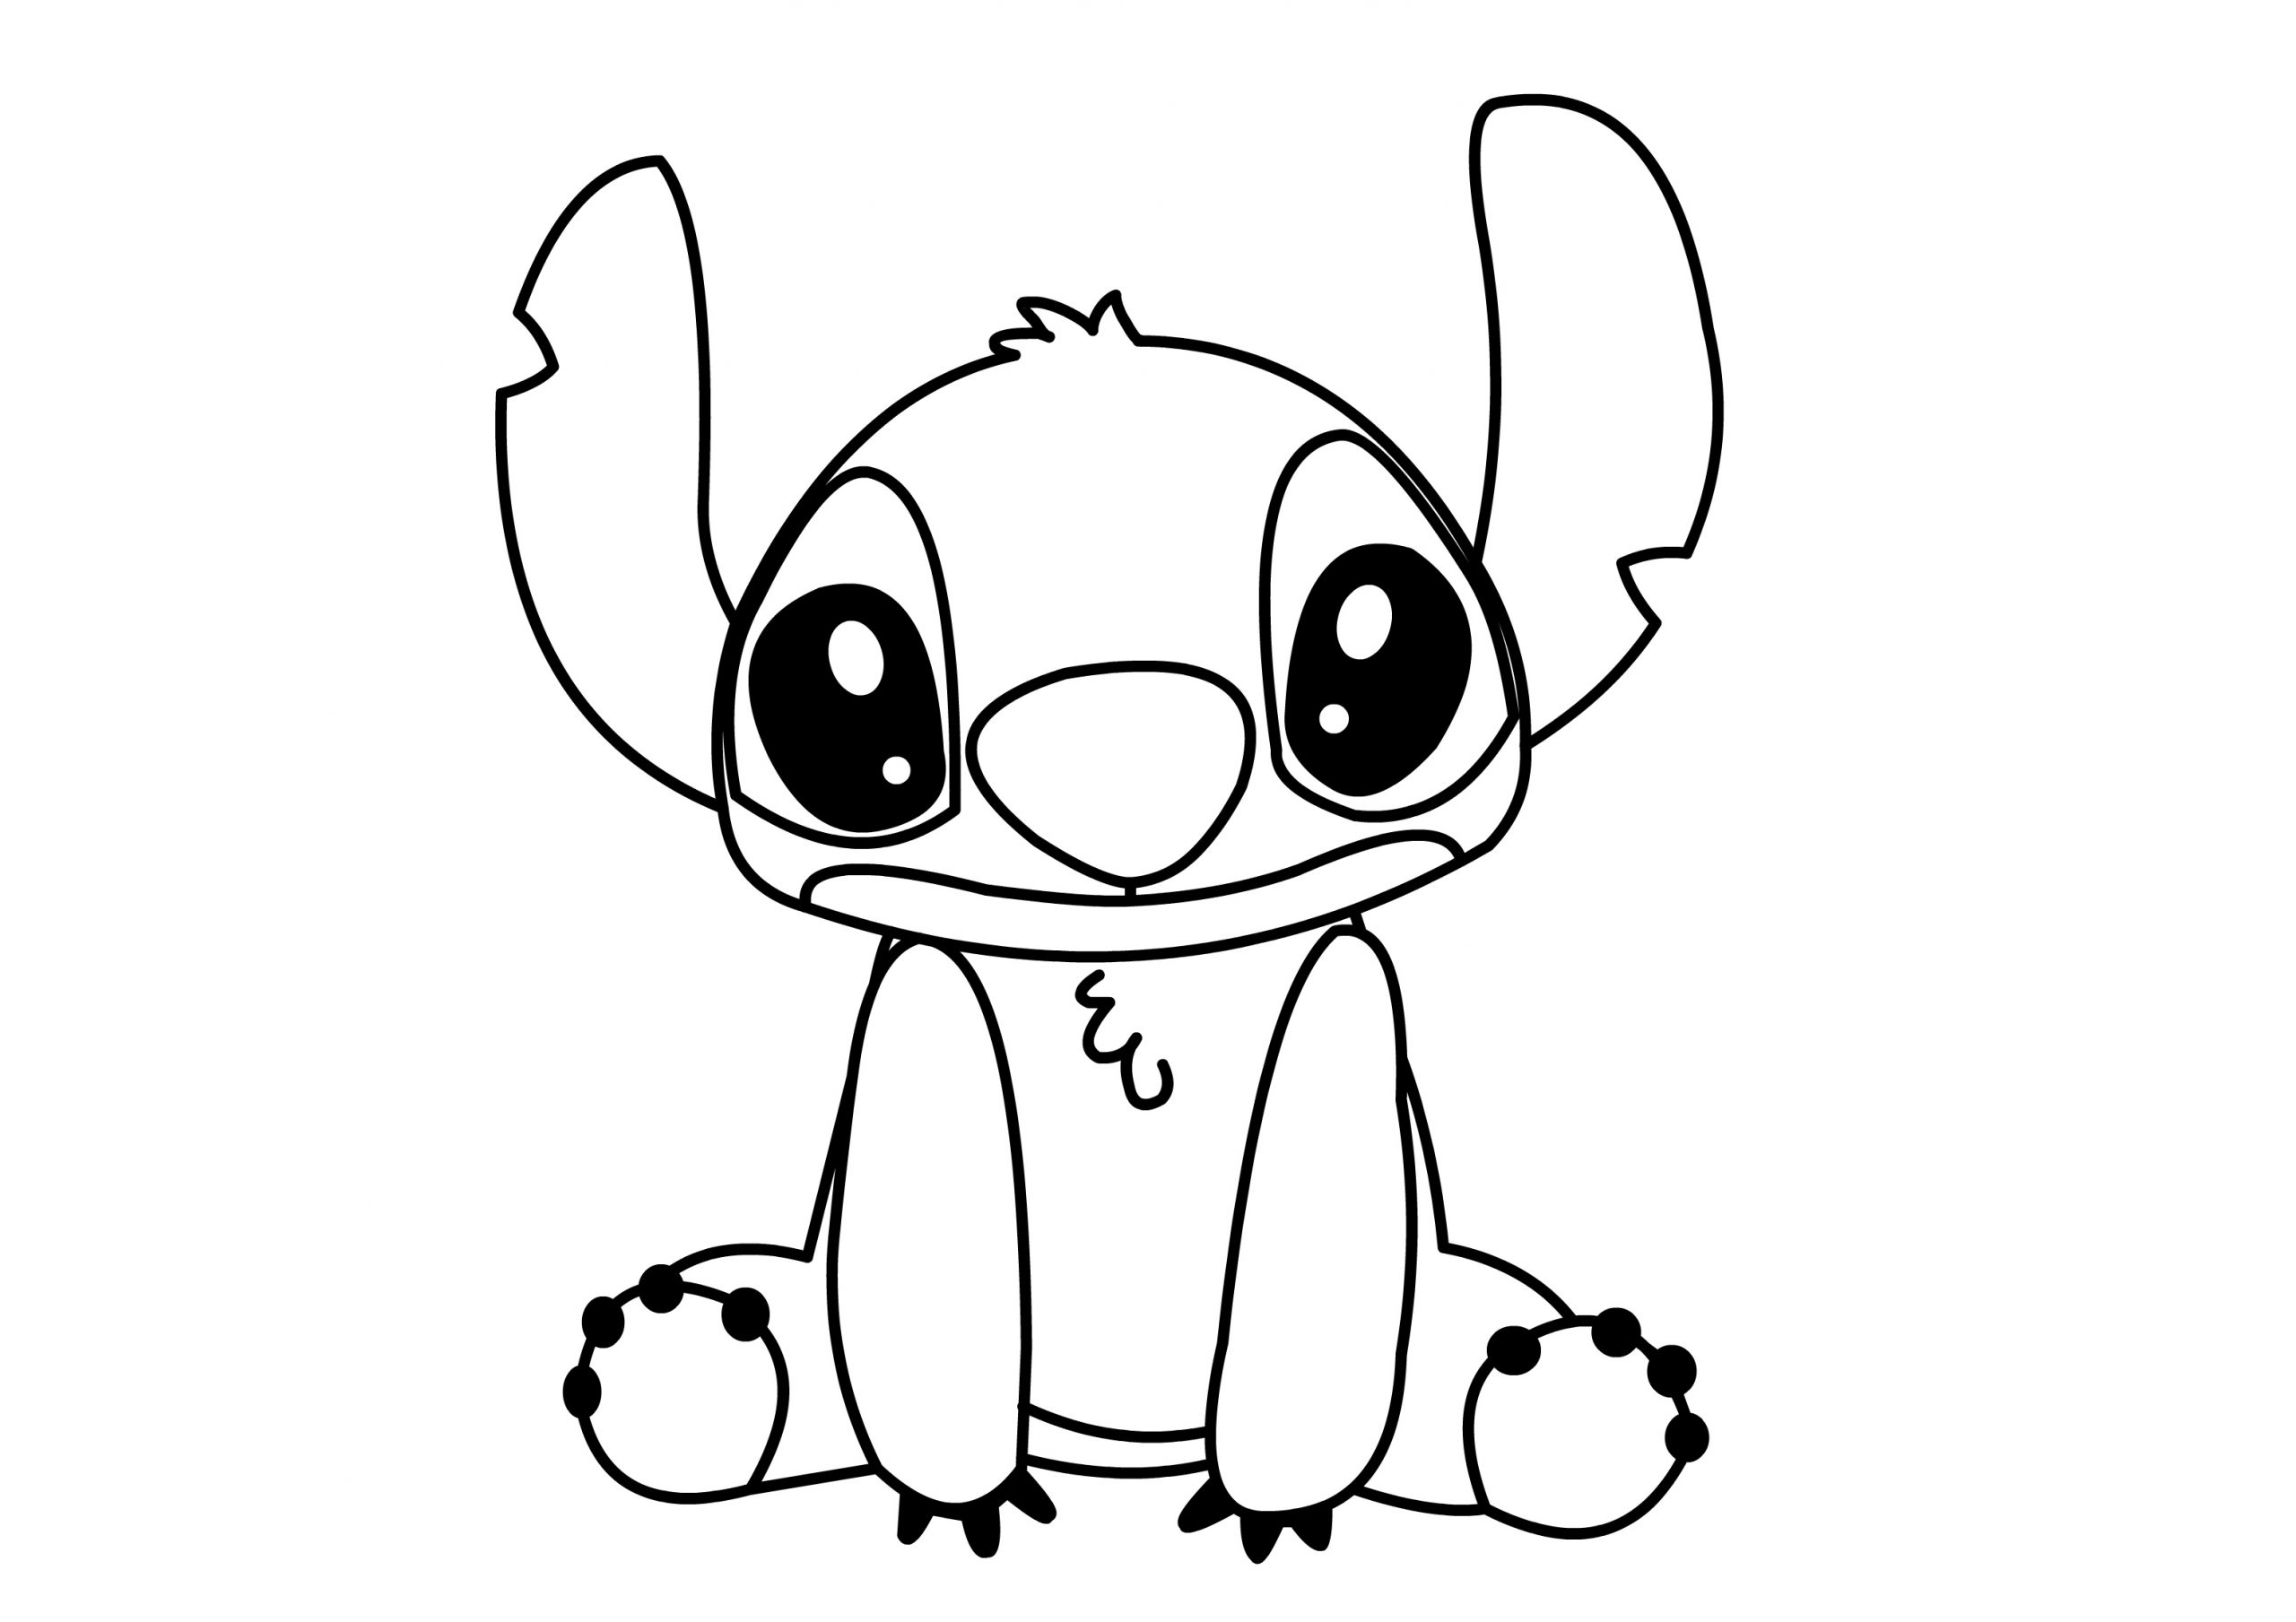 disney-cute-lilo-stitch-coloring-pages-high-resolution-printable-page-print-color-craft